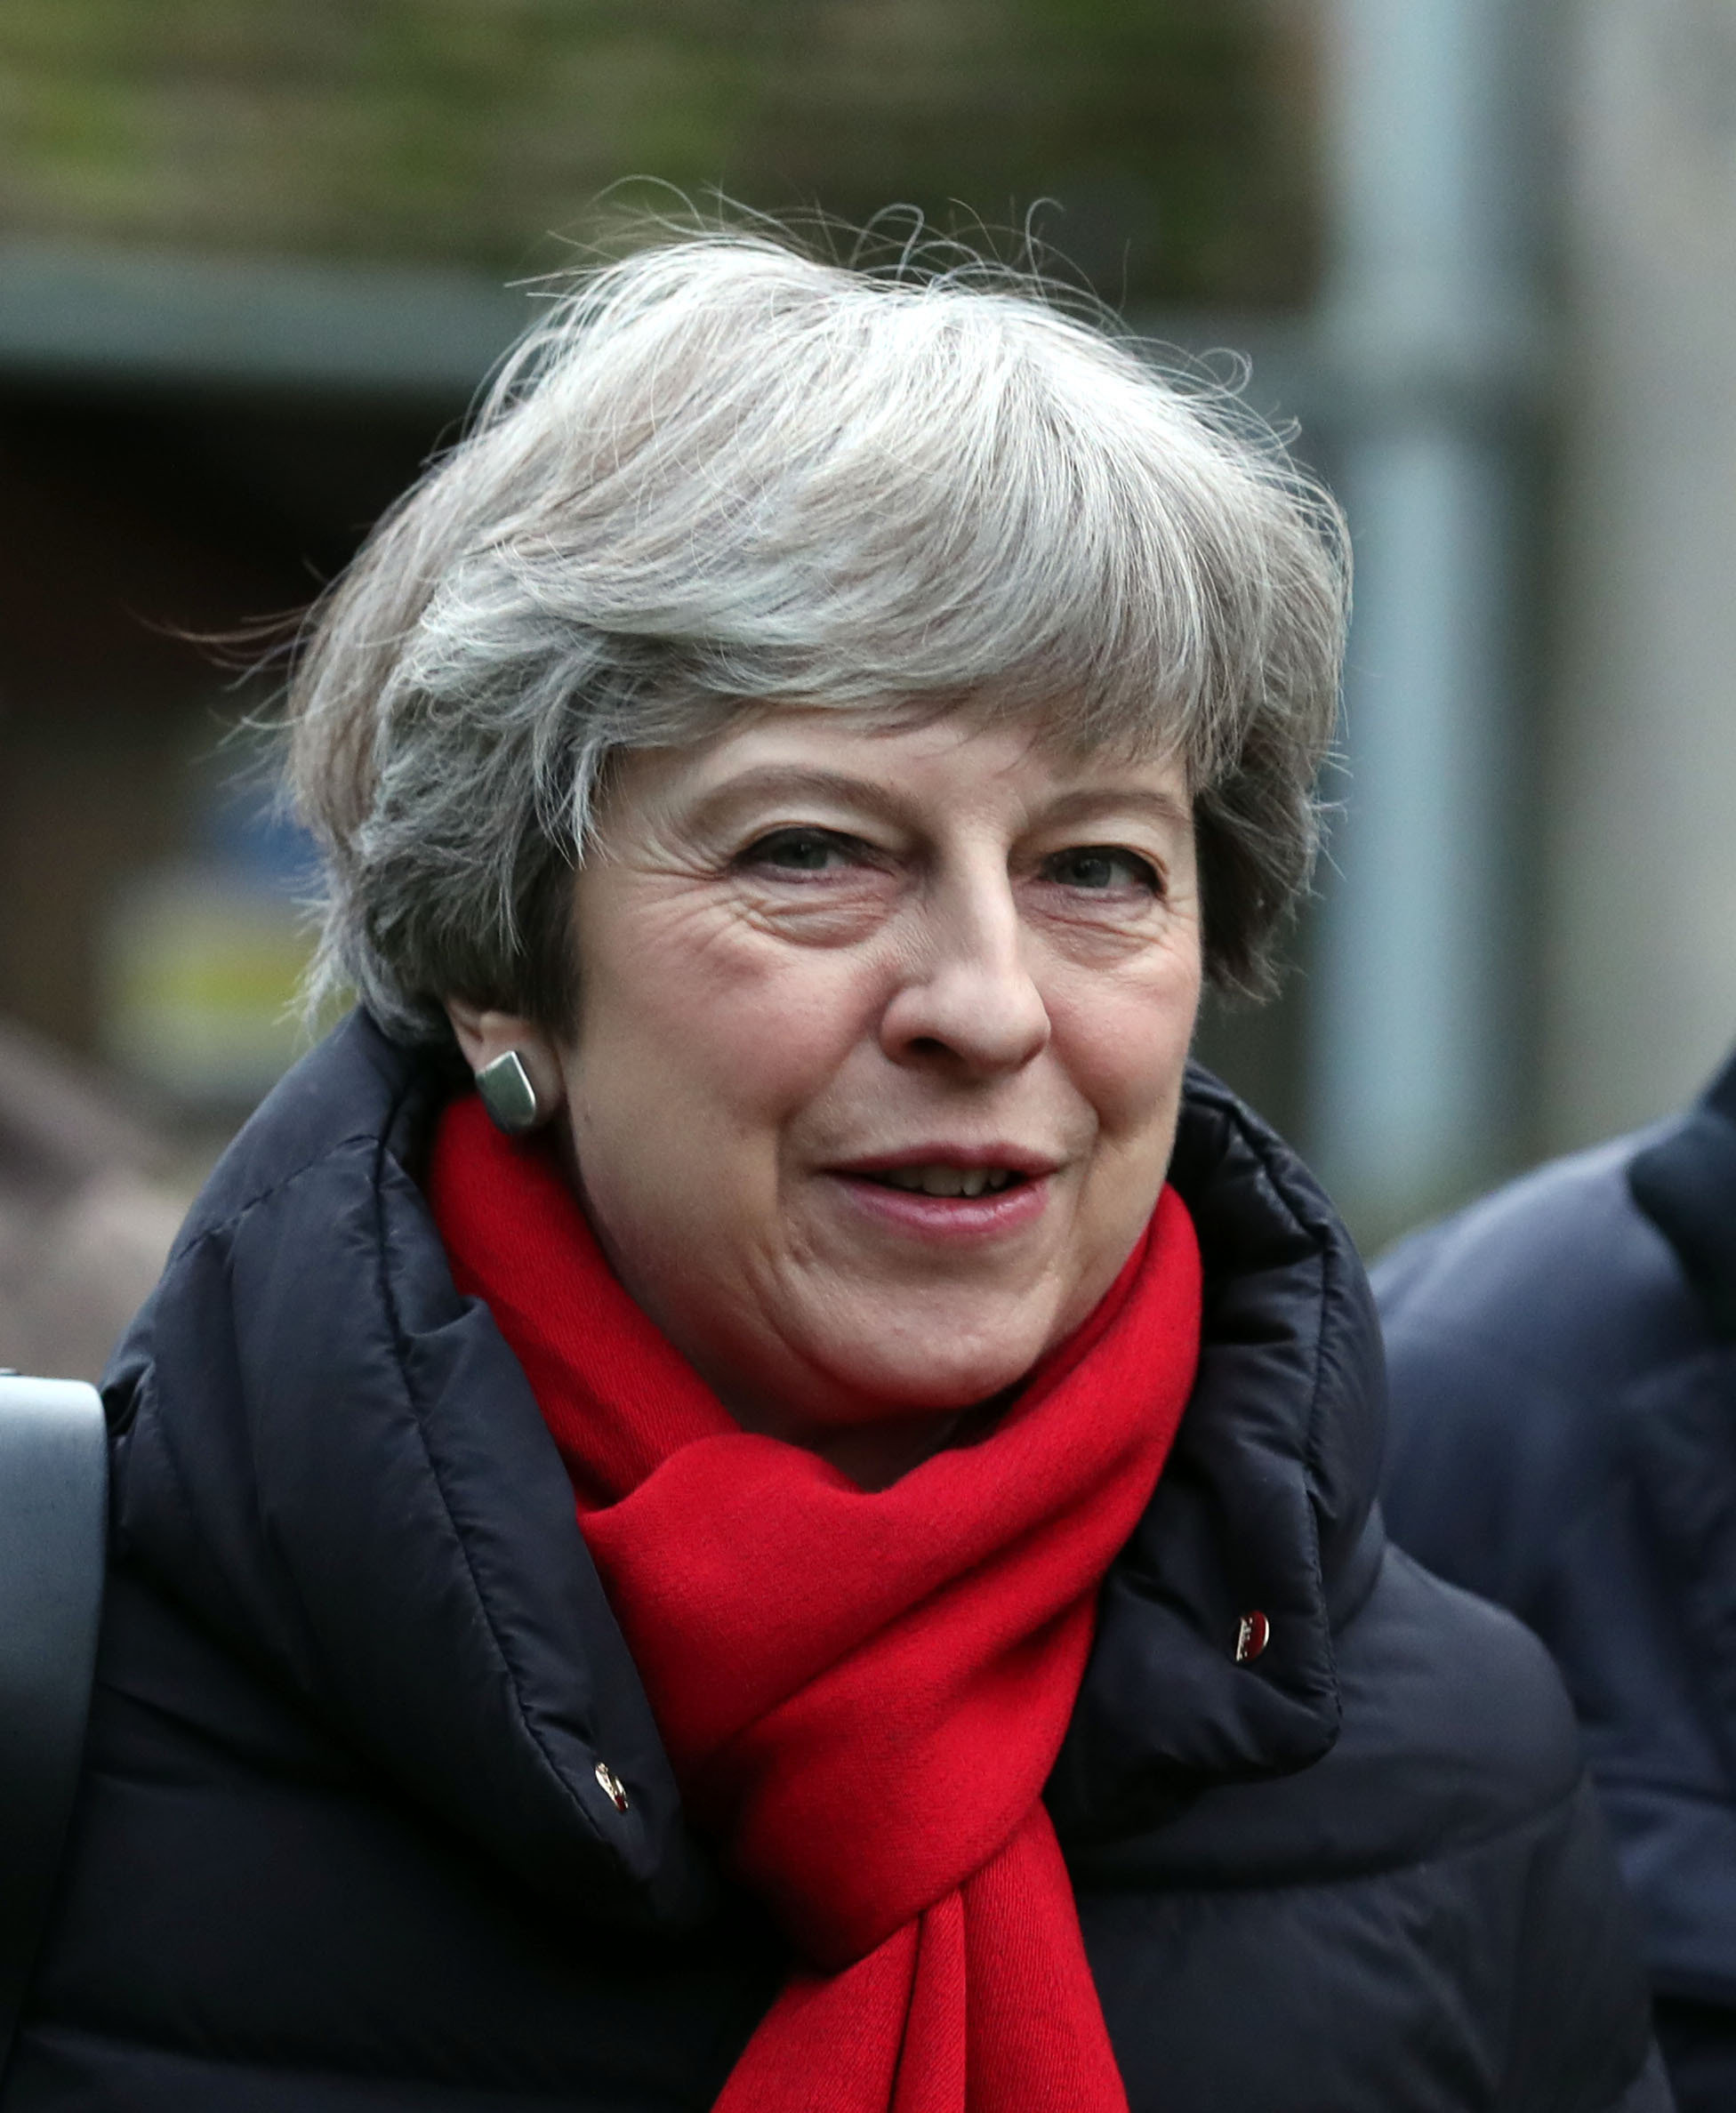 <strong>Prime Minister Theresa May has urged Britons to take pride in the country&rsquo;s Christian heritage at Christmas&nbsp;</strong>